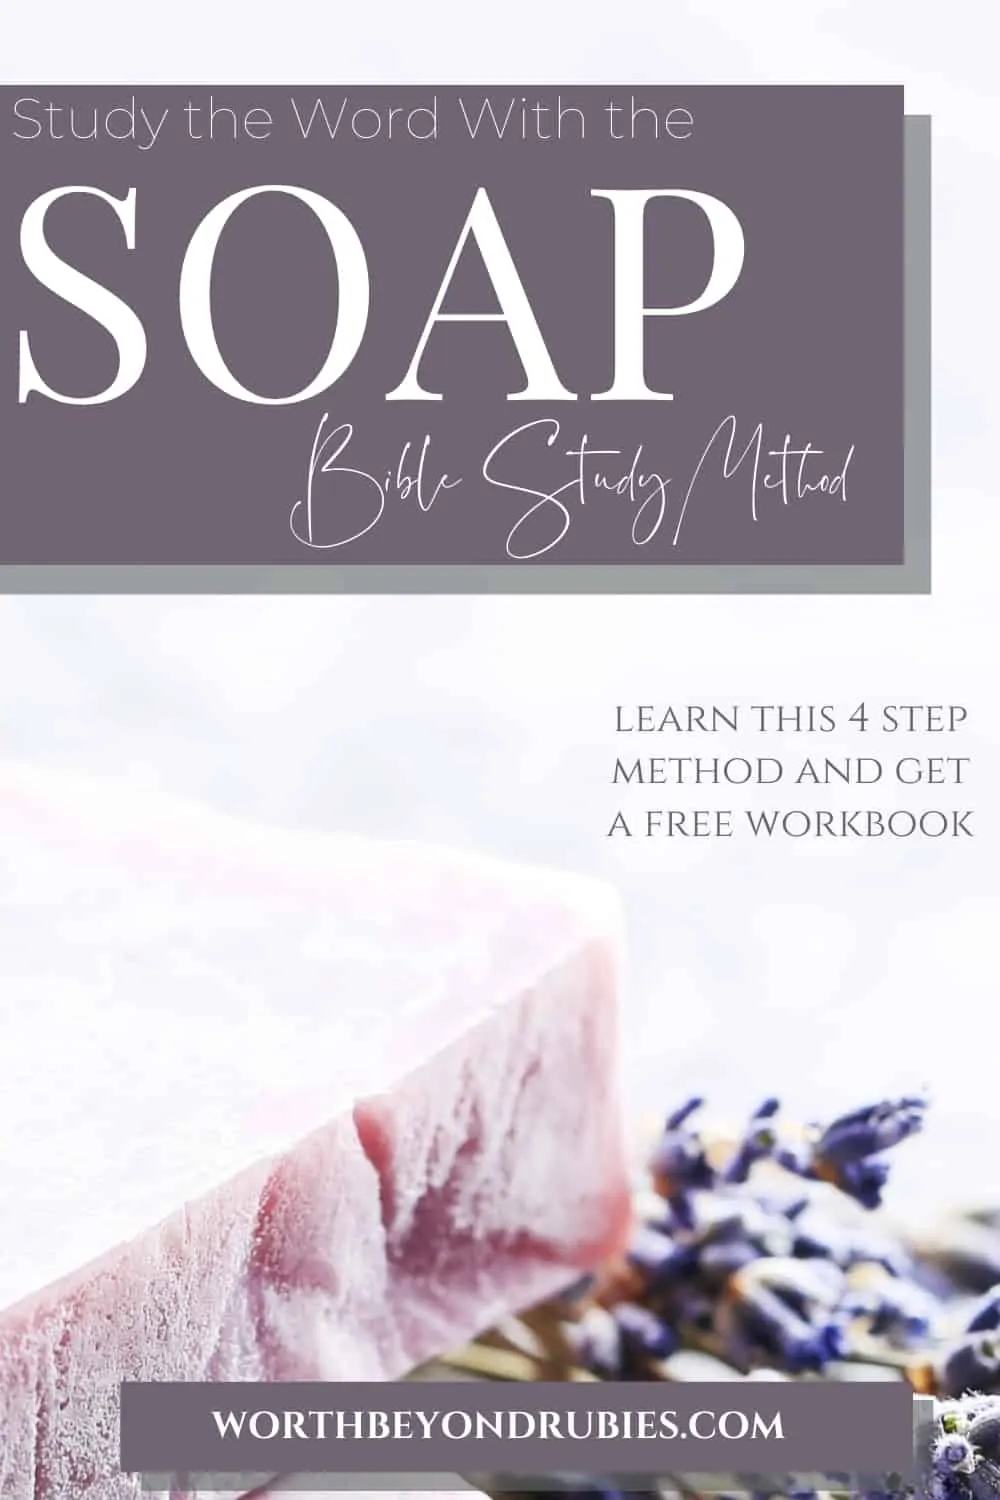 An image of homemade lavender soap with lavender next to it and text that says The SOAP Bible Study Method With Free Workbook!